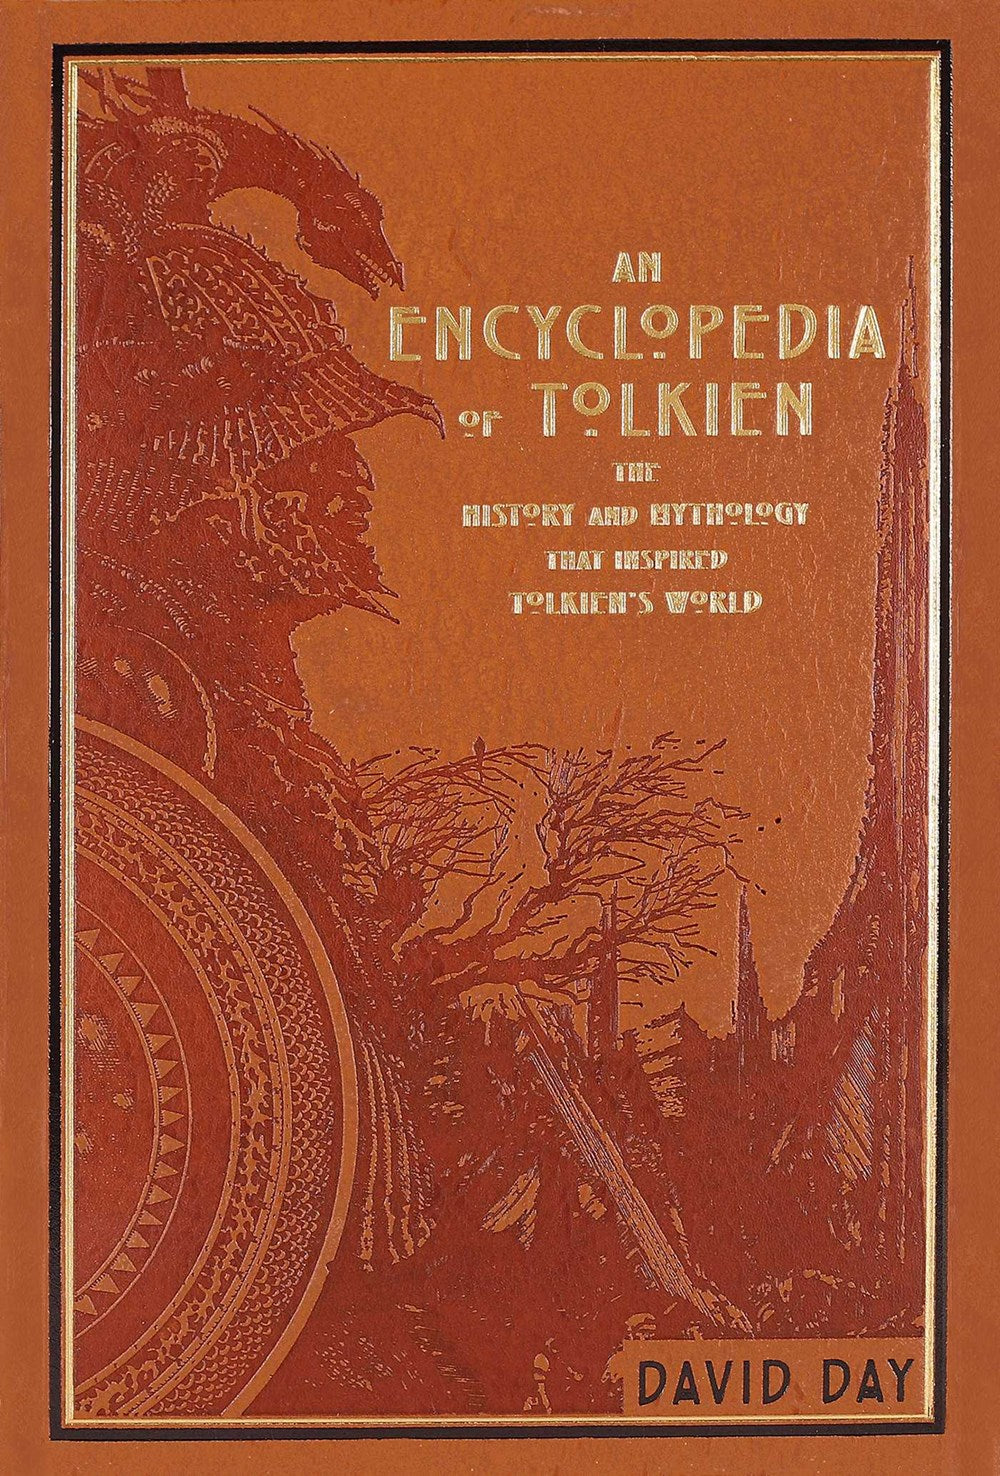 An Encyclopedia of Tolkien : The History and Mythology That Inspired Tolkien's World